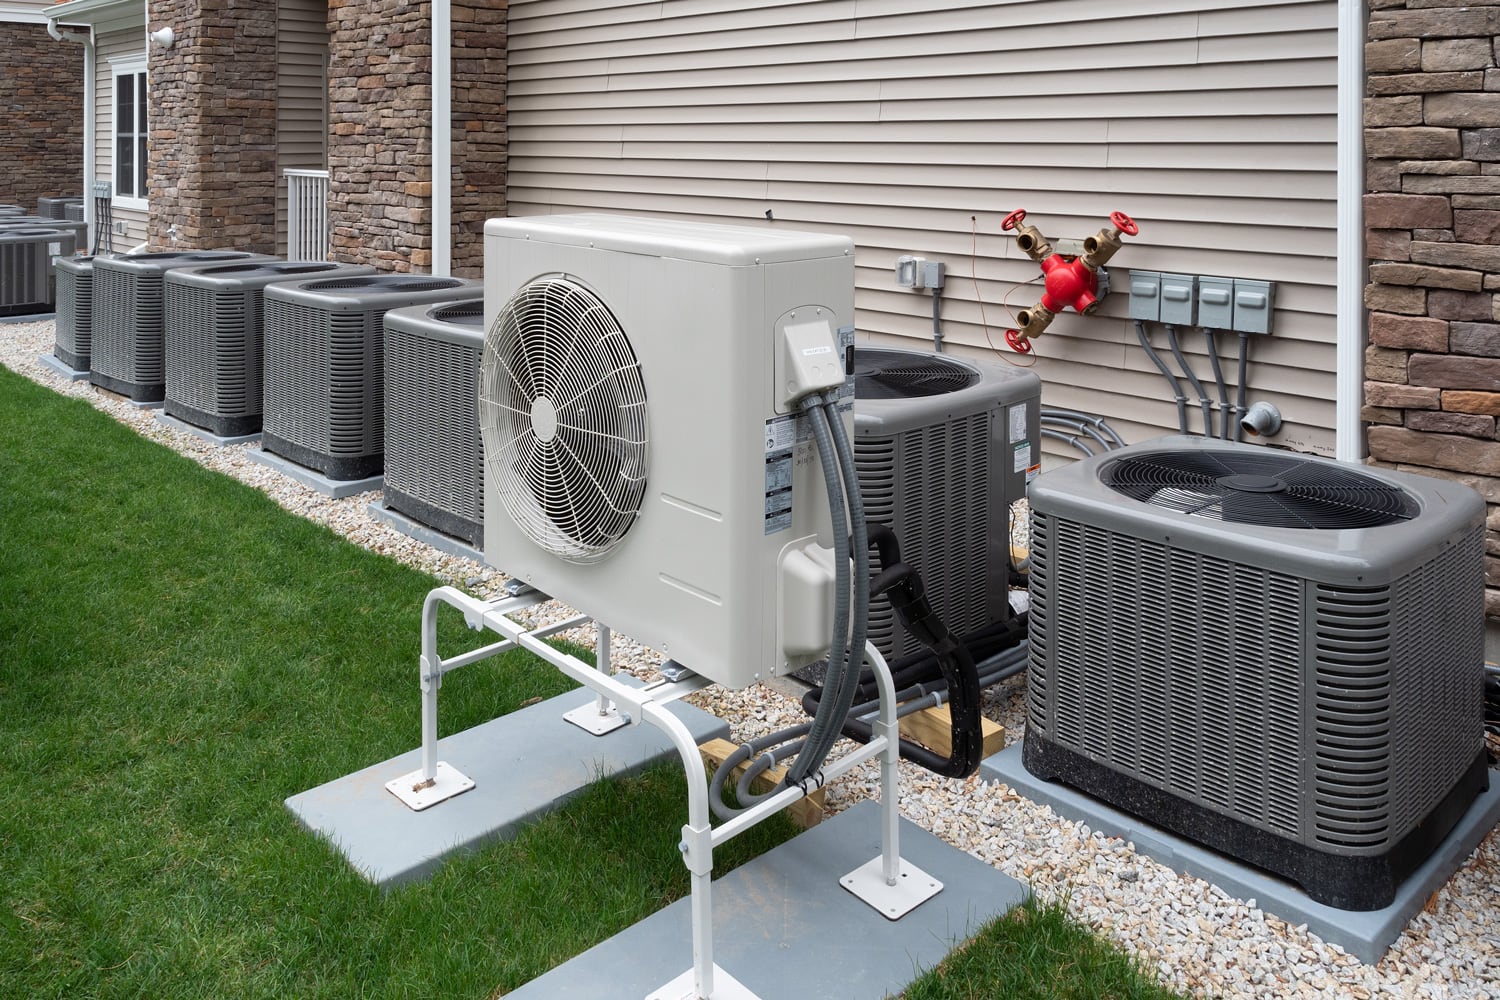 Modern air conditioning and heating units or heat pumps, used in homes and apartments without central air conditioning